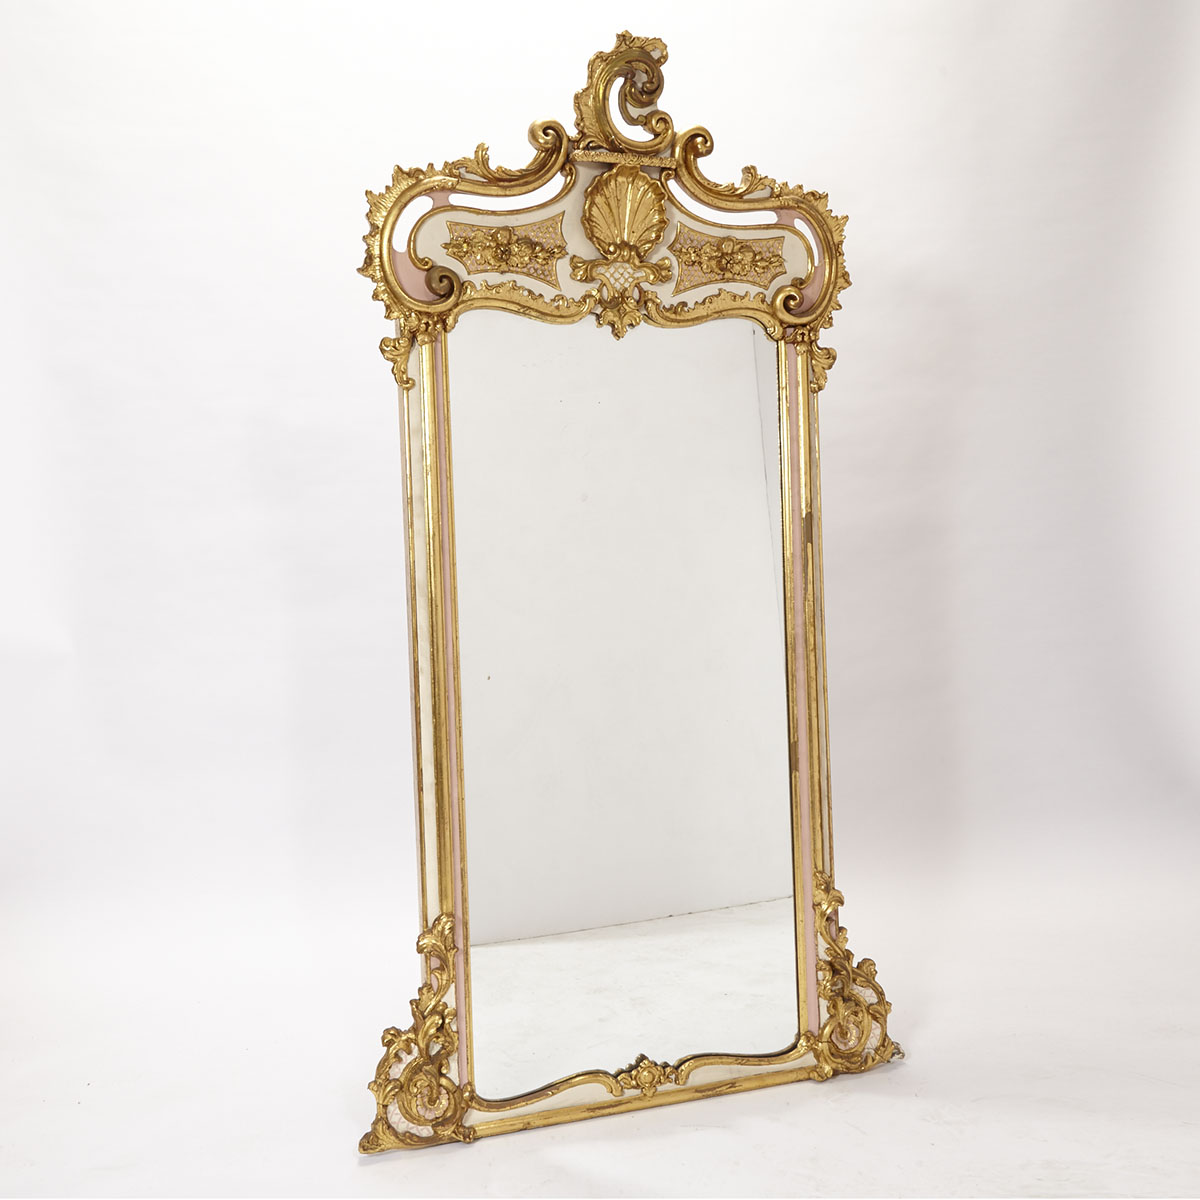 Italian Rococo Painted and Parcel Giltwood Pier Mirror, 19th/early 20th century